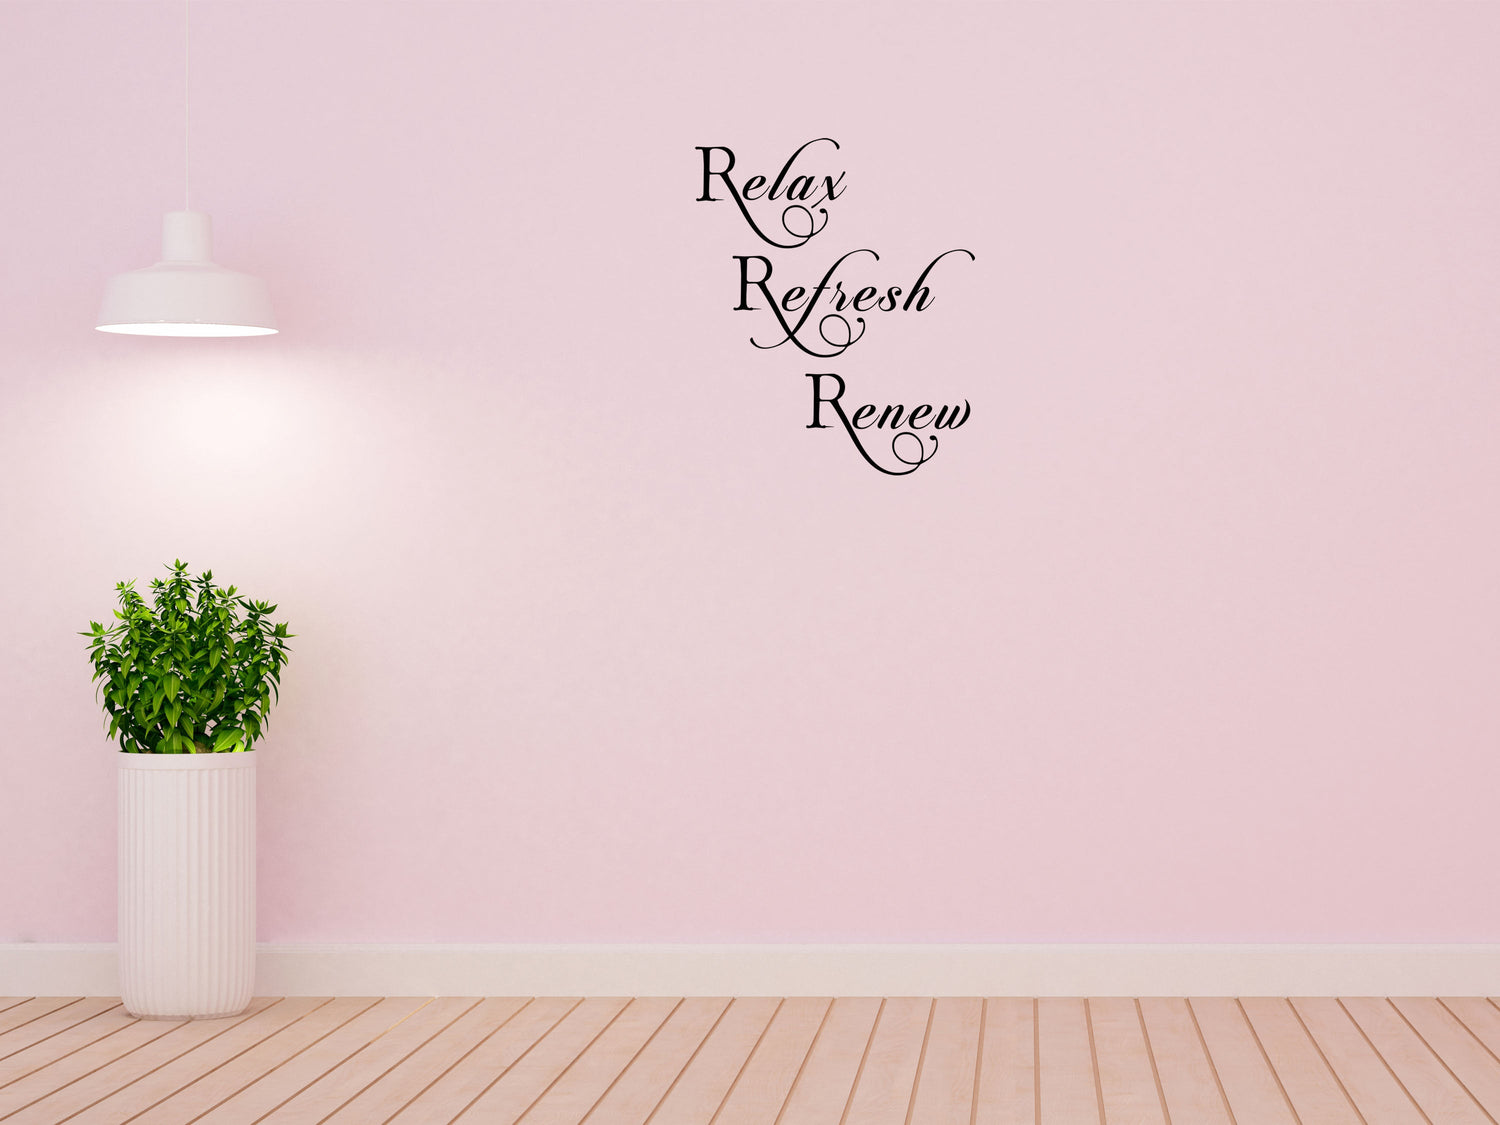 Relax Refresh Renew Wall Decal Vinyl Wall Decal Inspirational Wall Signs 